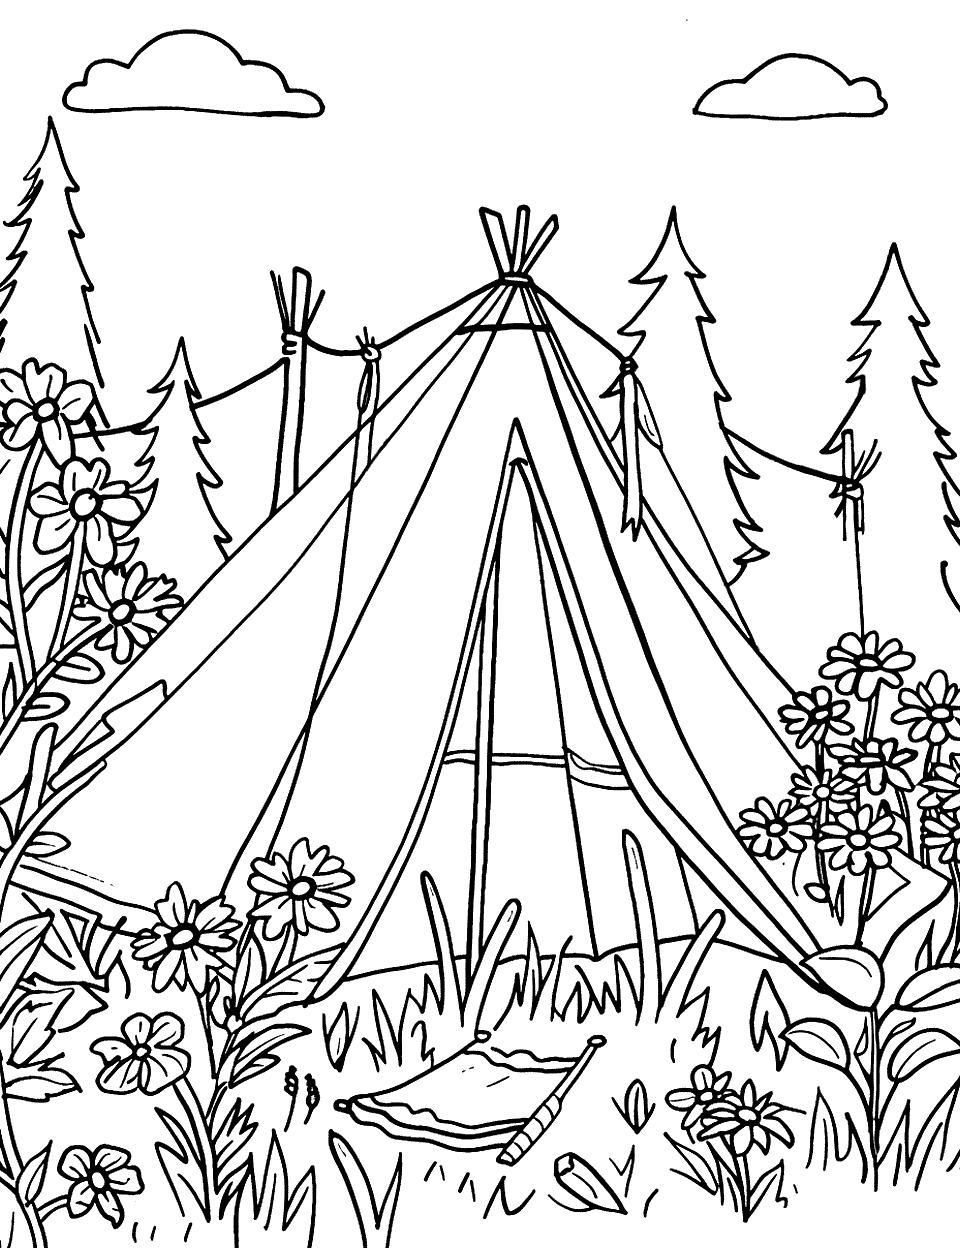 Wildflower Meadow by the Campsite Camping Coloring Page - A tent set up next to a meadow full of wildflowers.